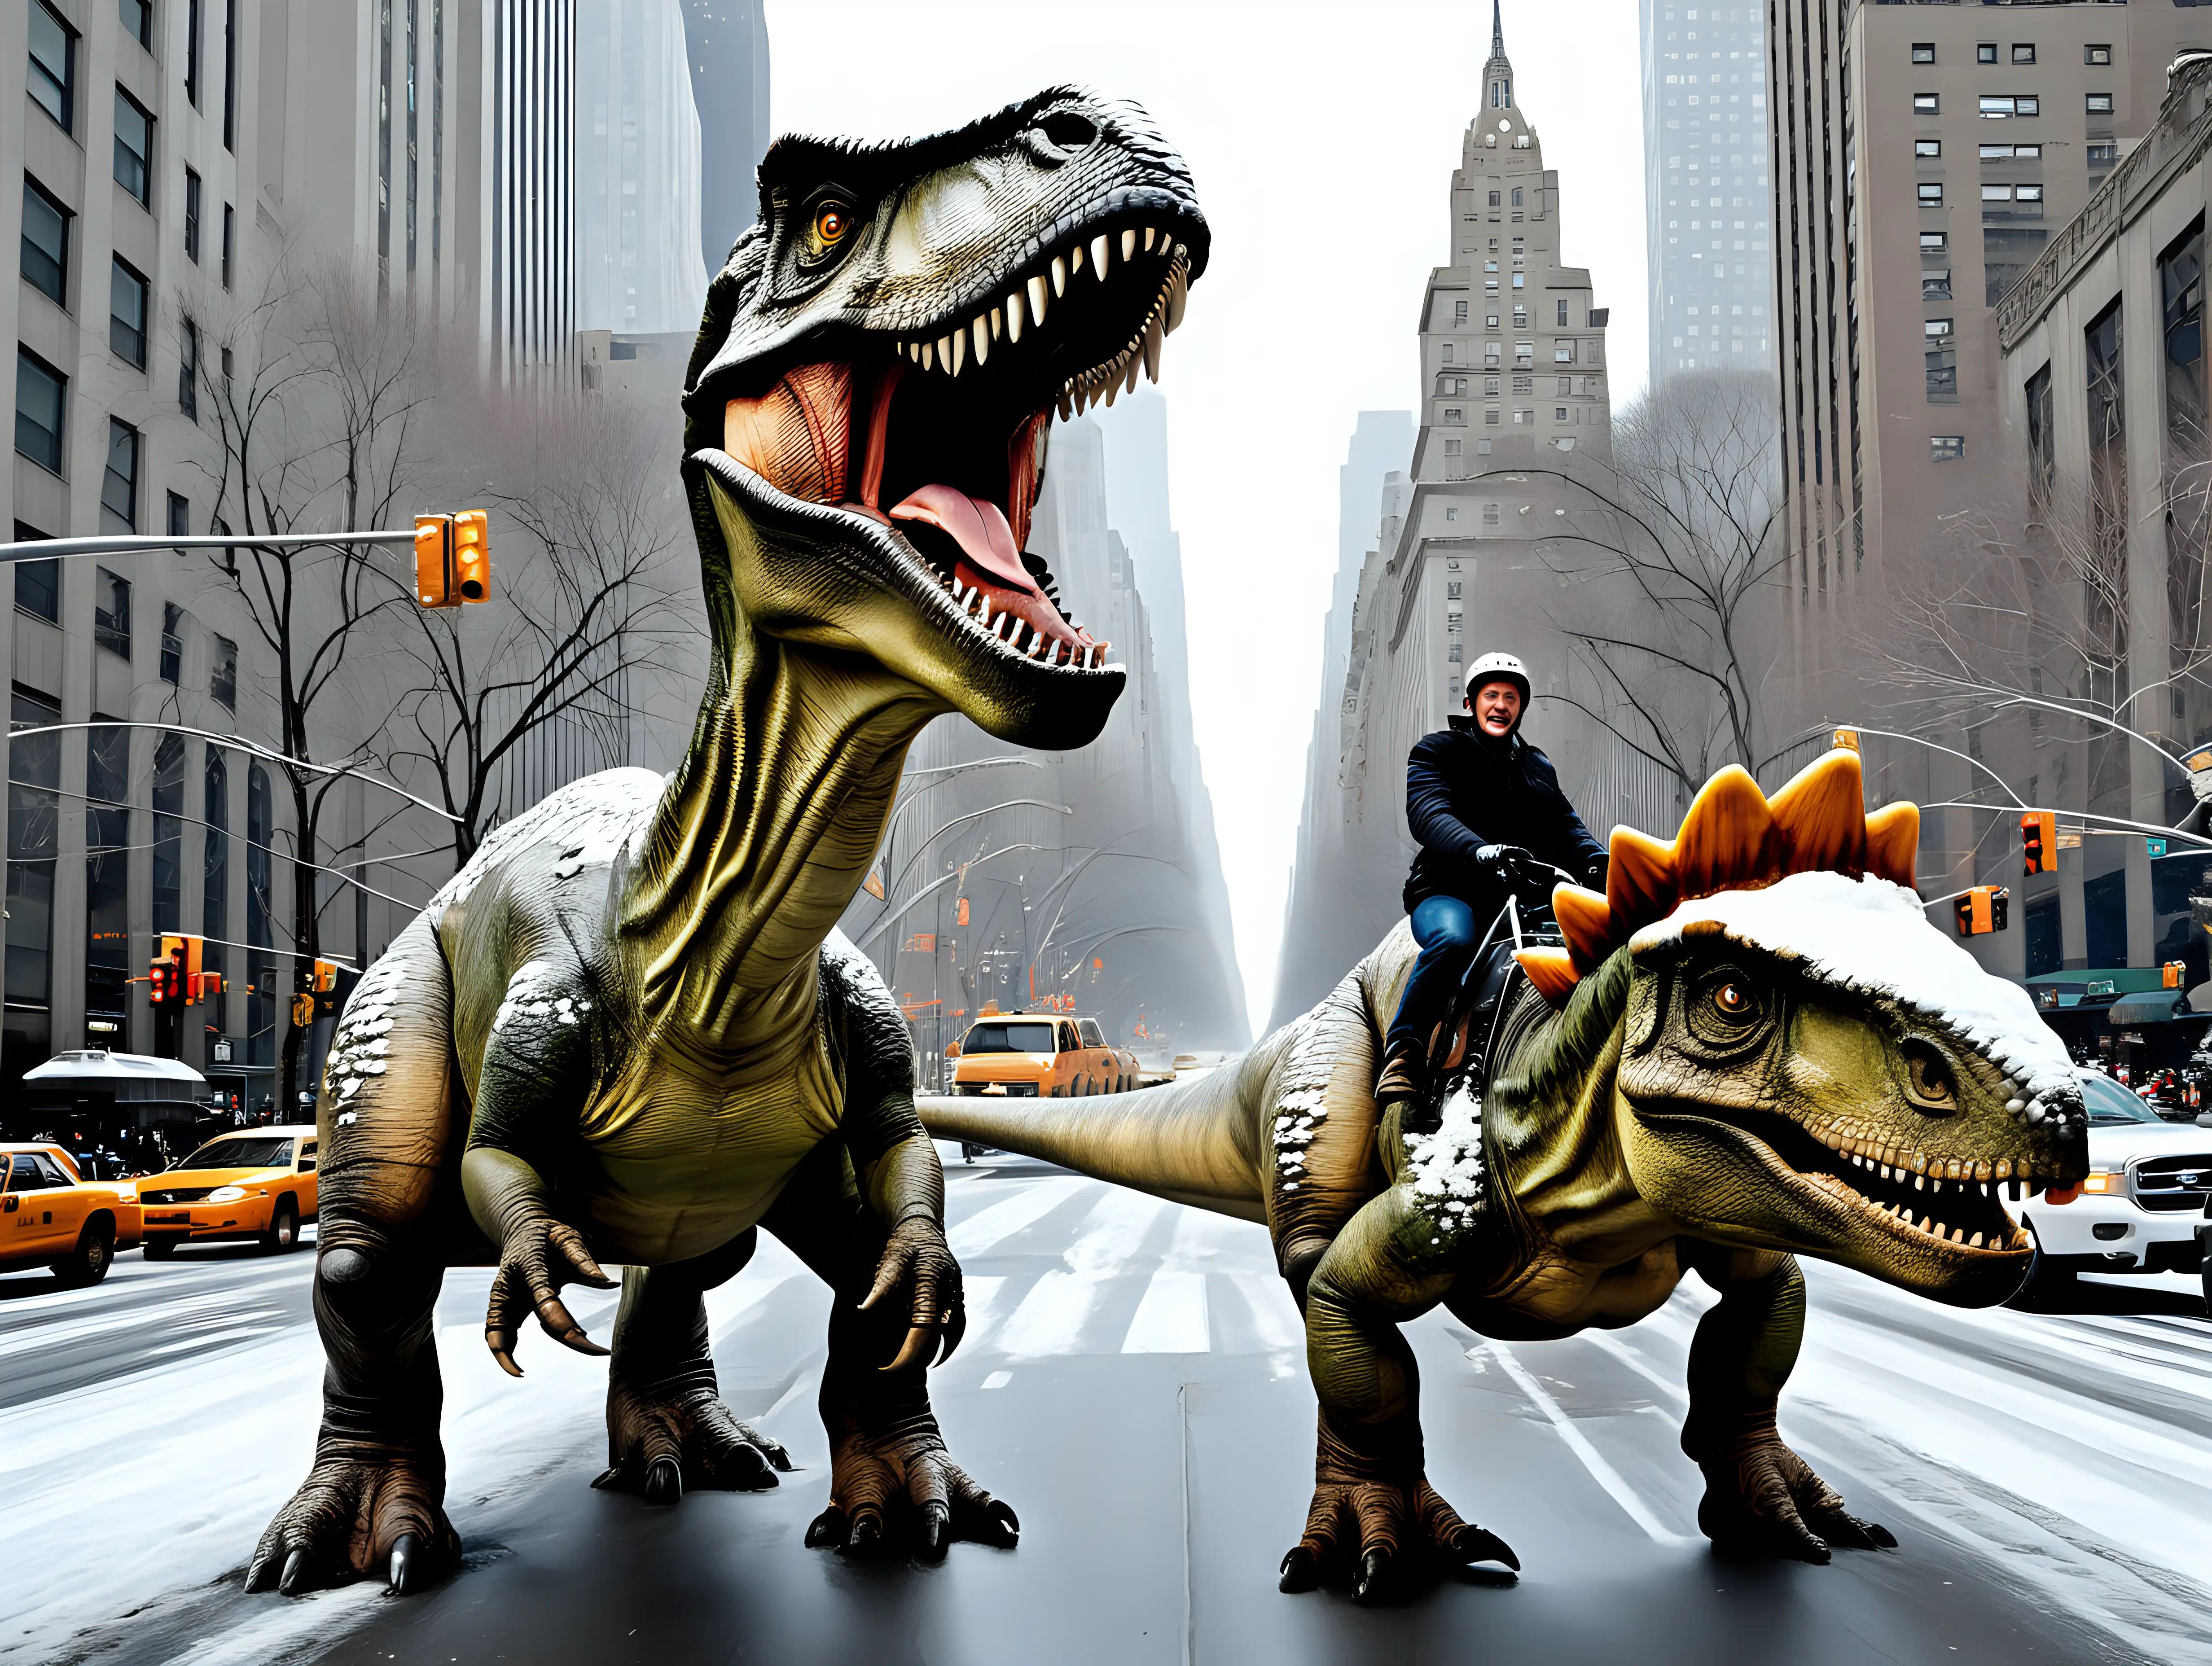 men riding dinosaurs on 5th avenue NYC in winter